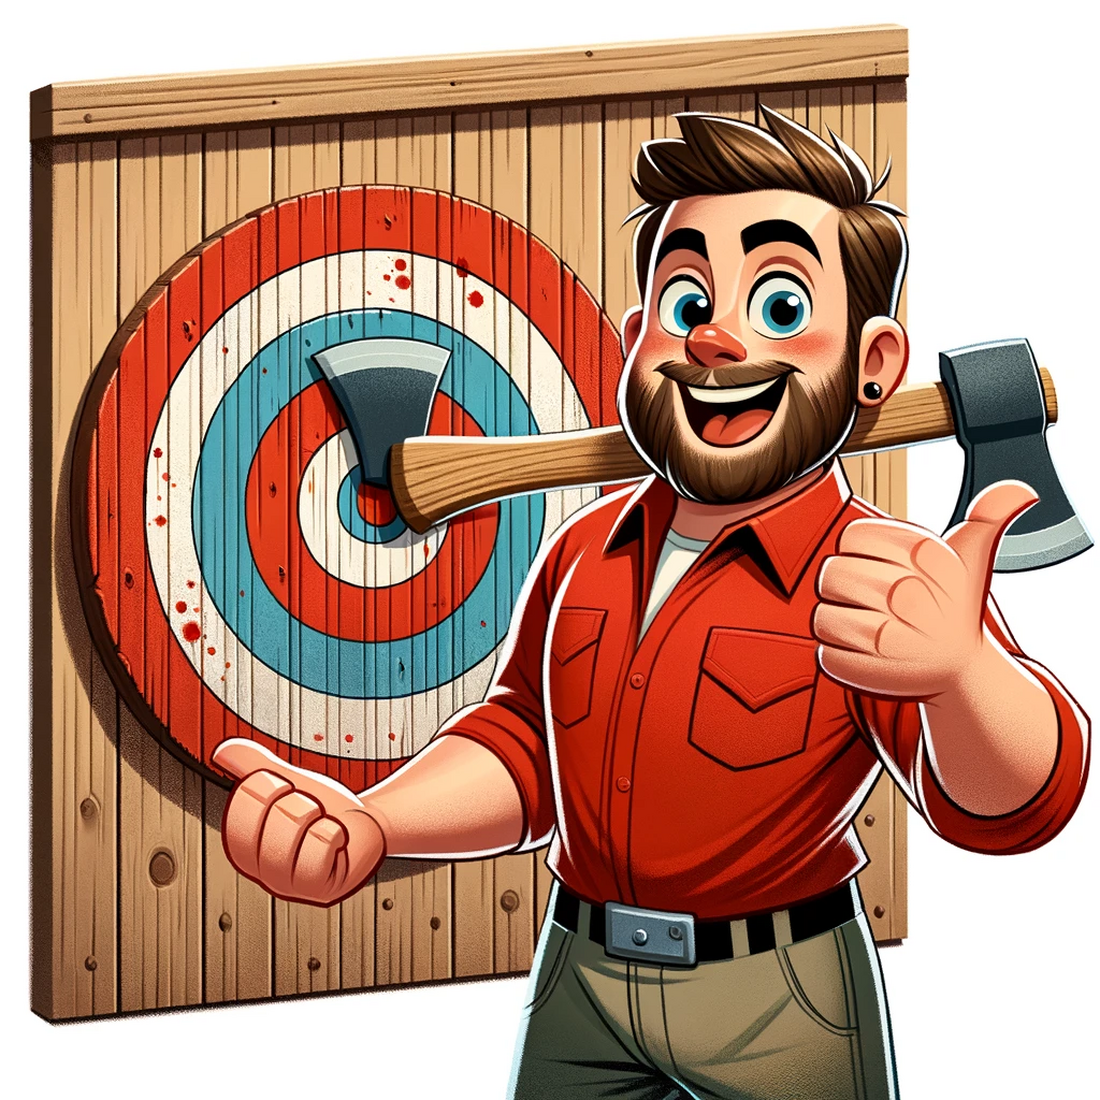 AI art of a happy man with a target and an axe behind him, in a cartoon style